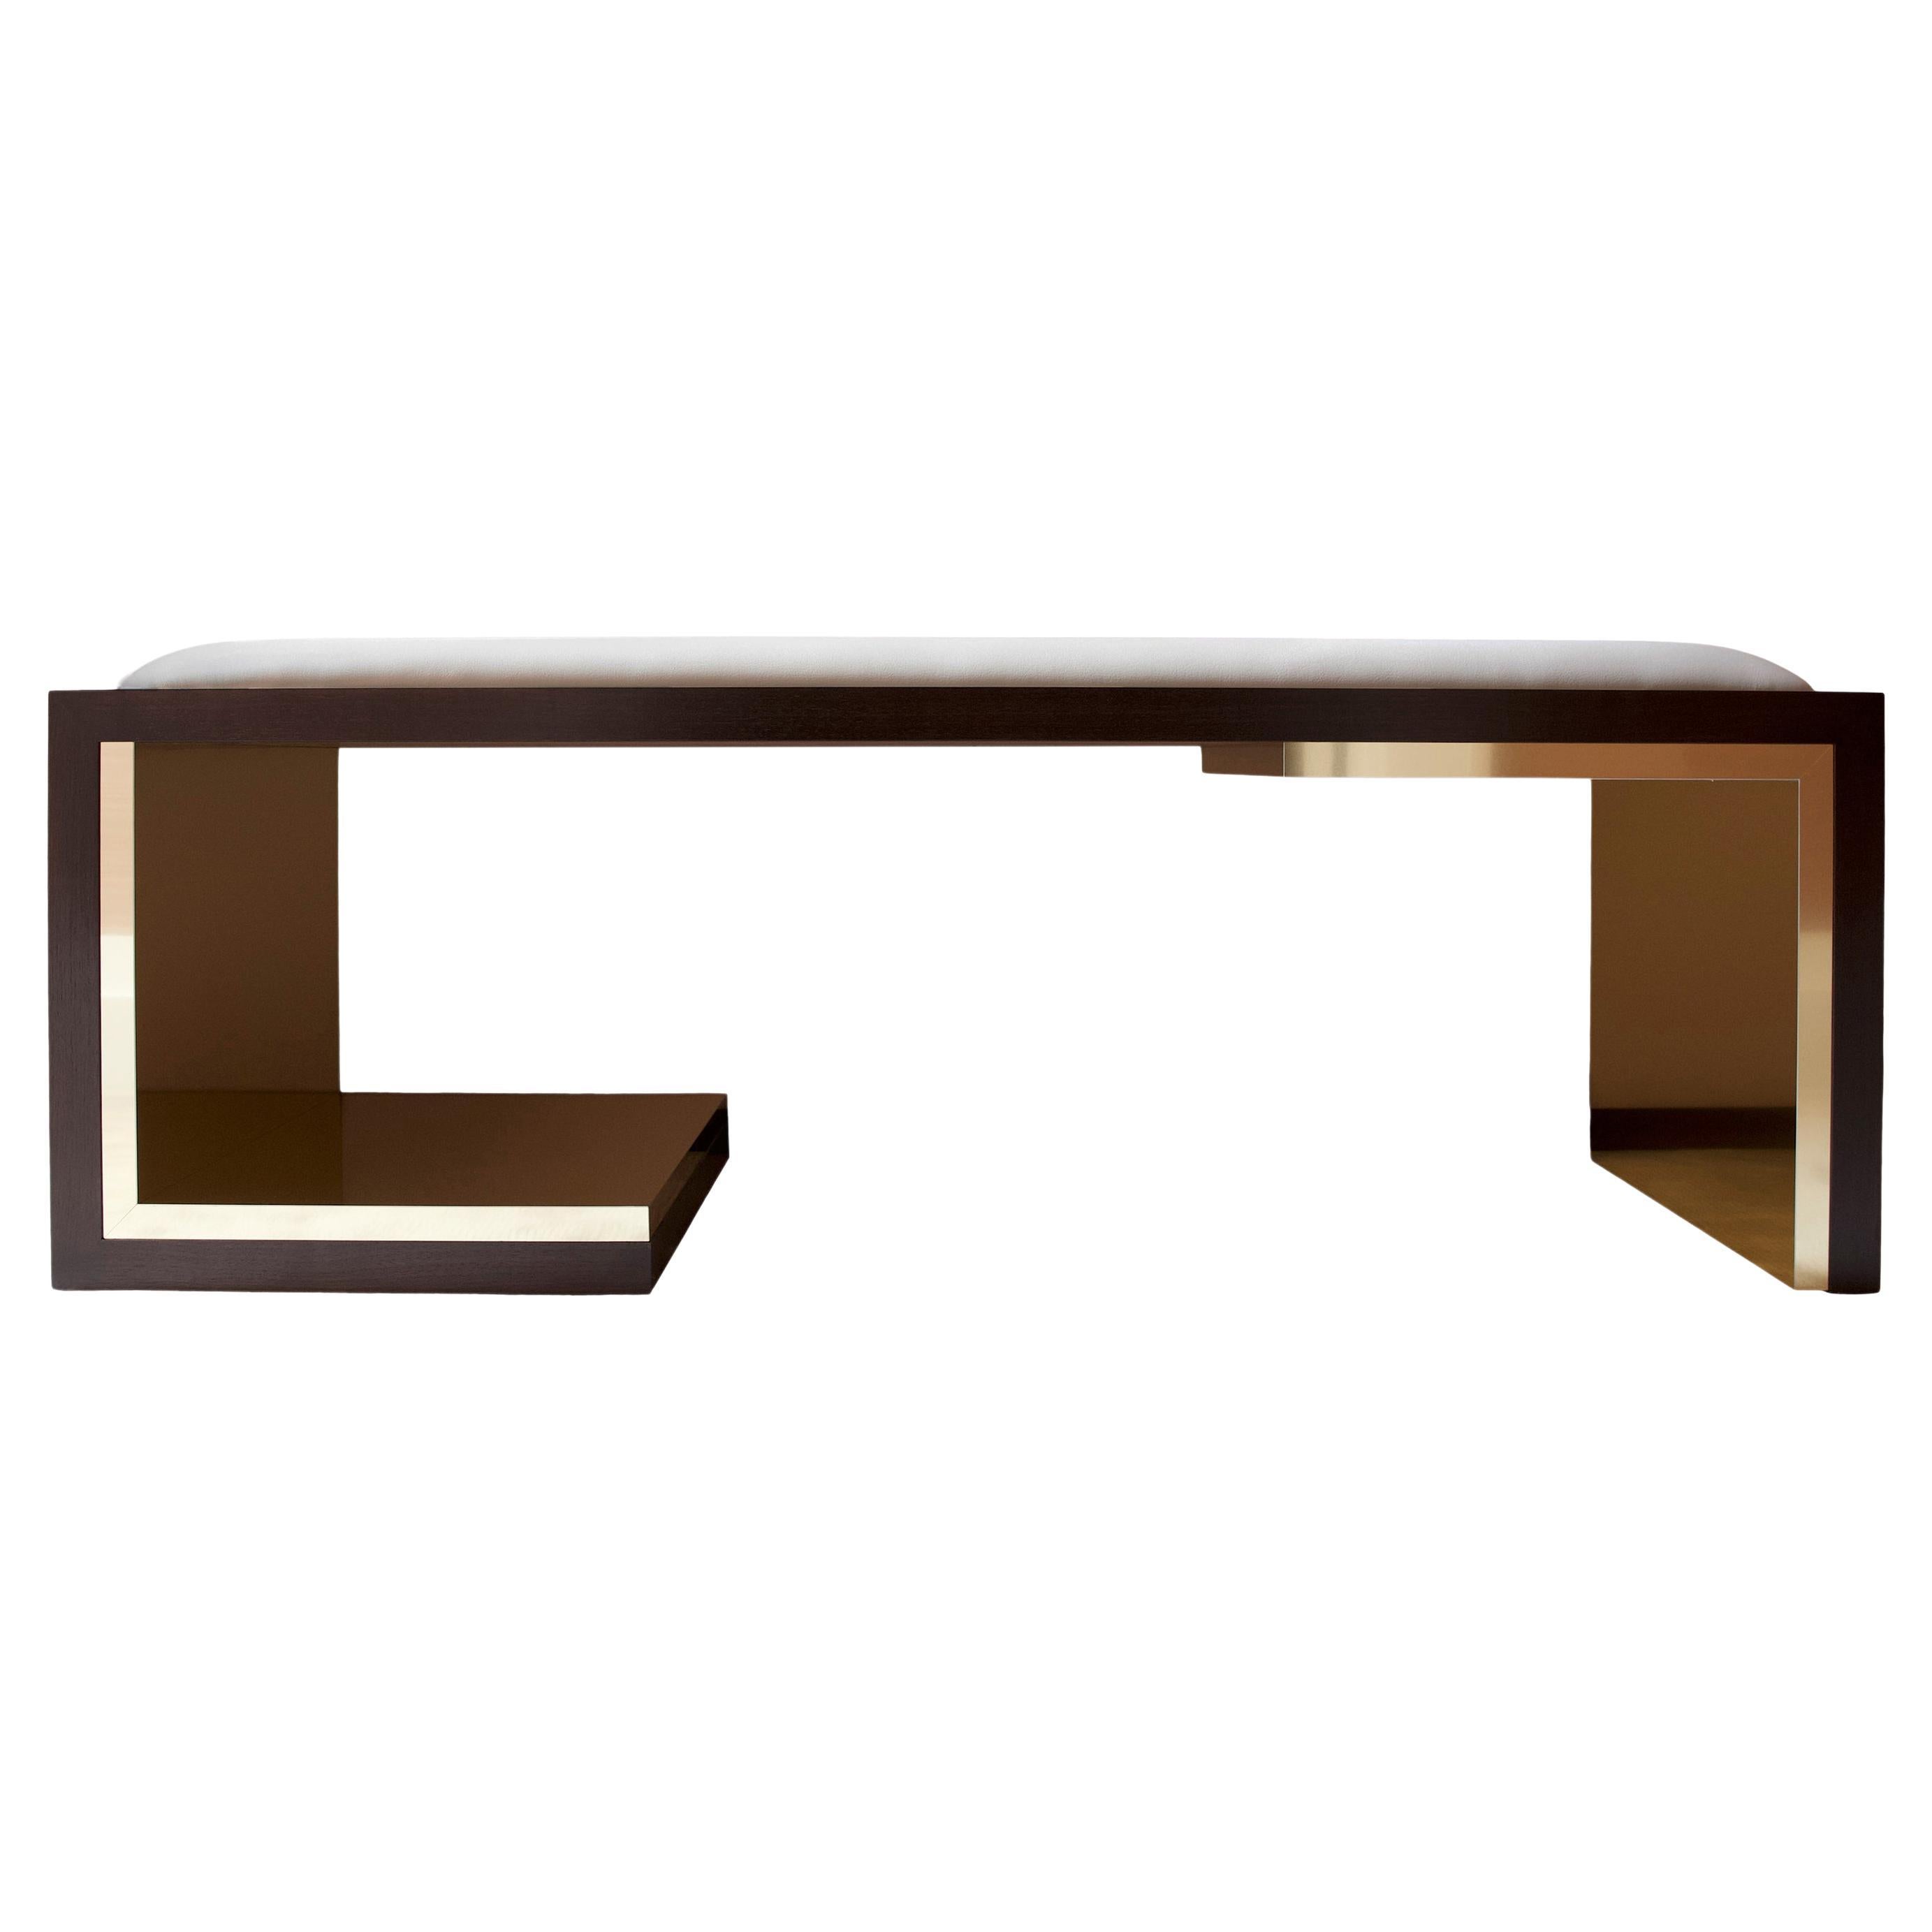 Asymmetrical Brass Inlay Vegan Leather Seat Cushion Bench For Sale